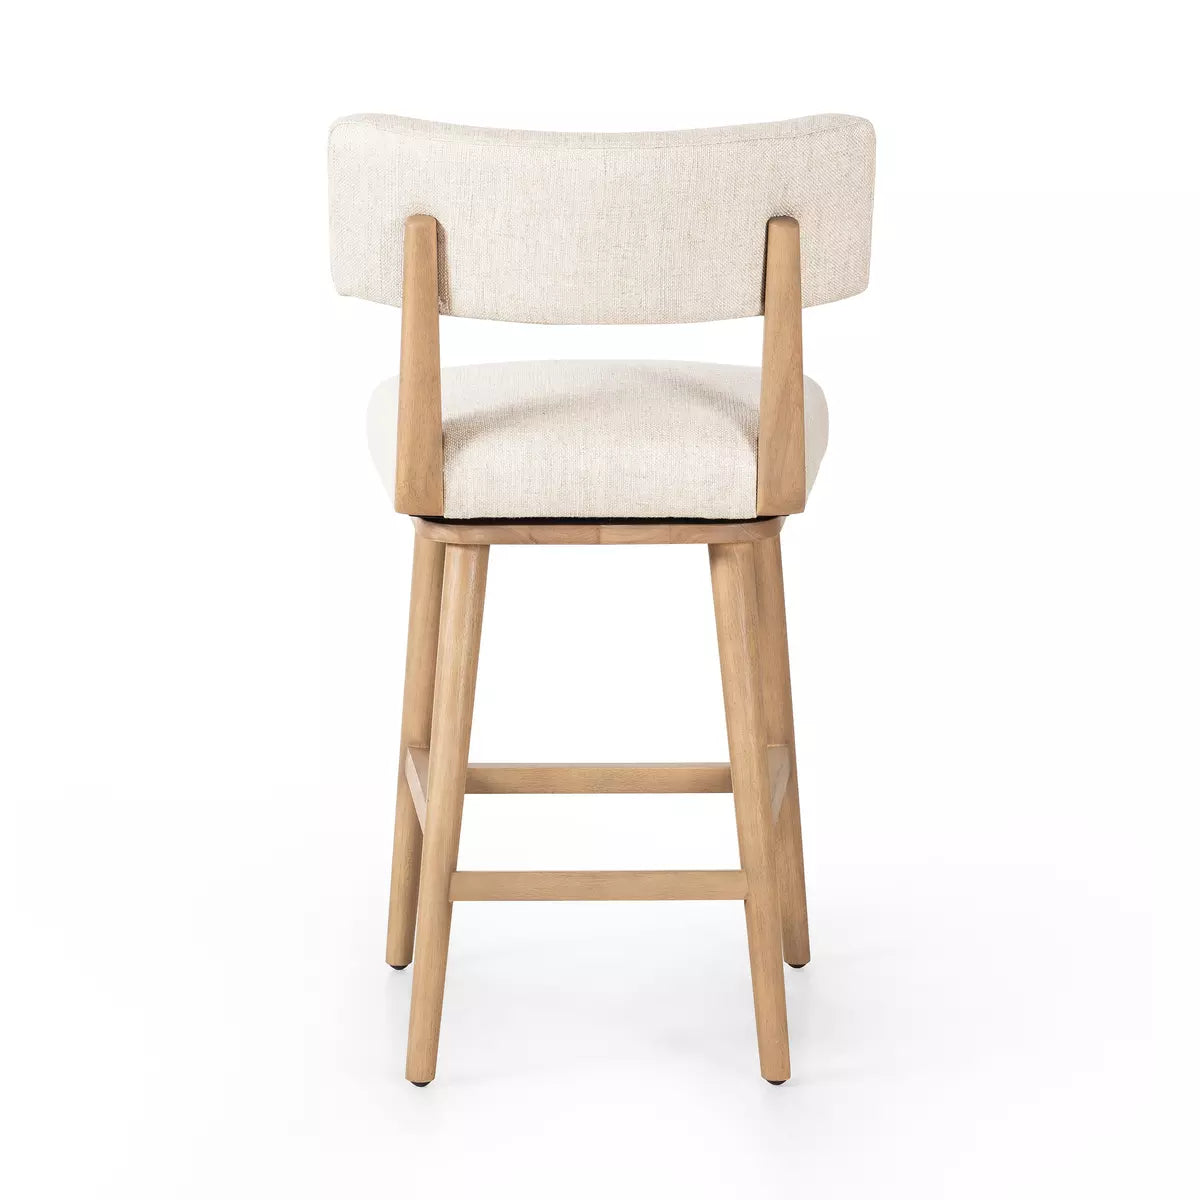 Cardell Swivel Counter Stool